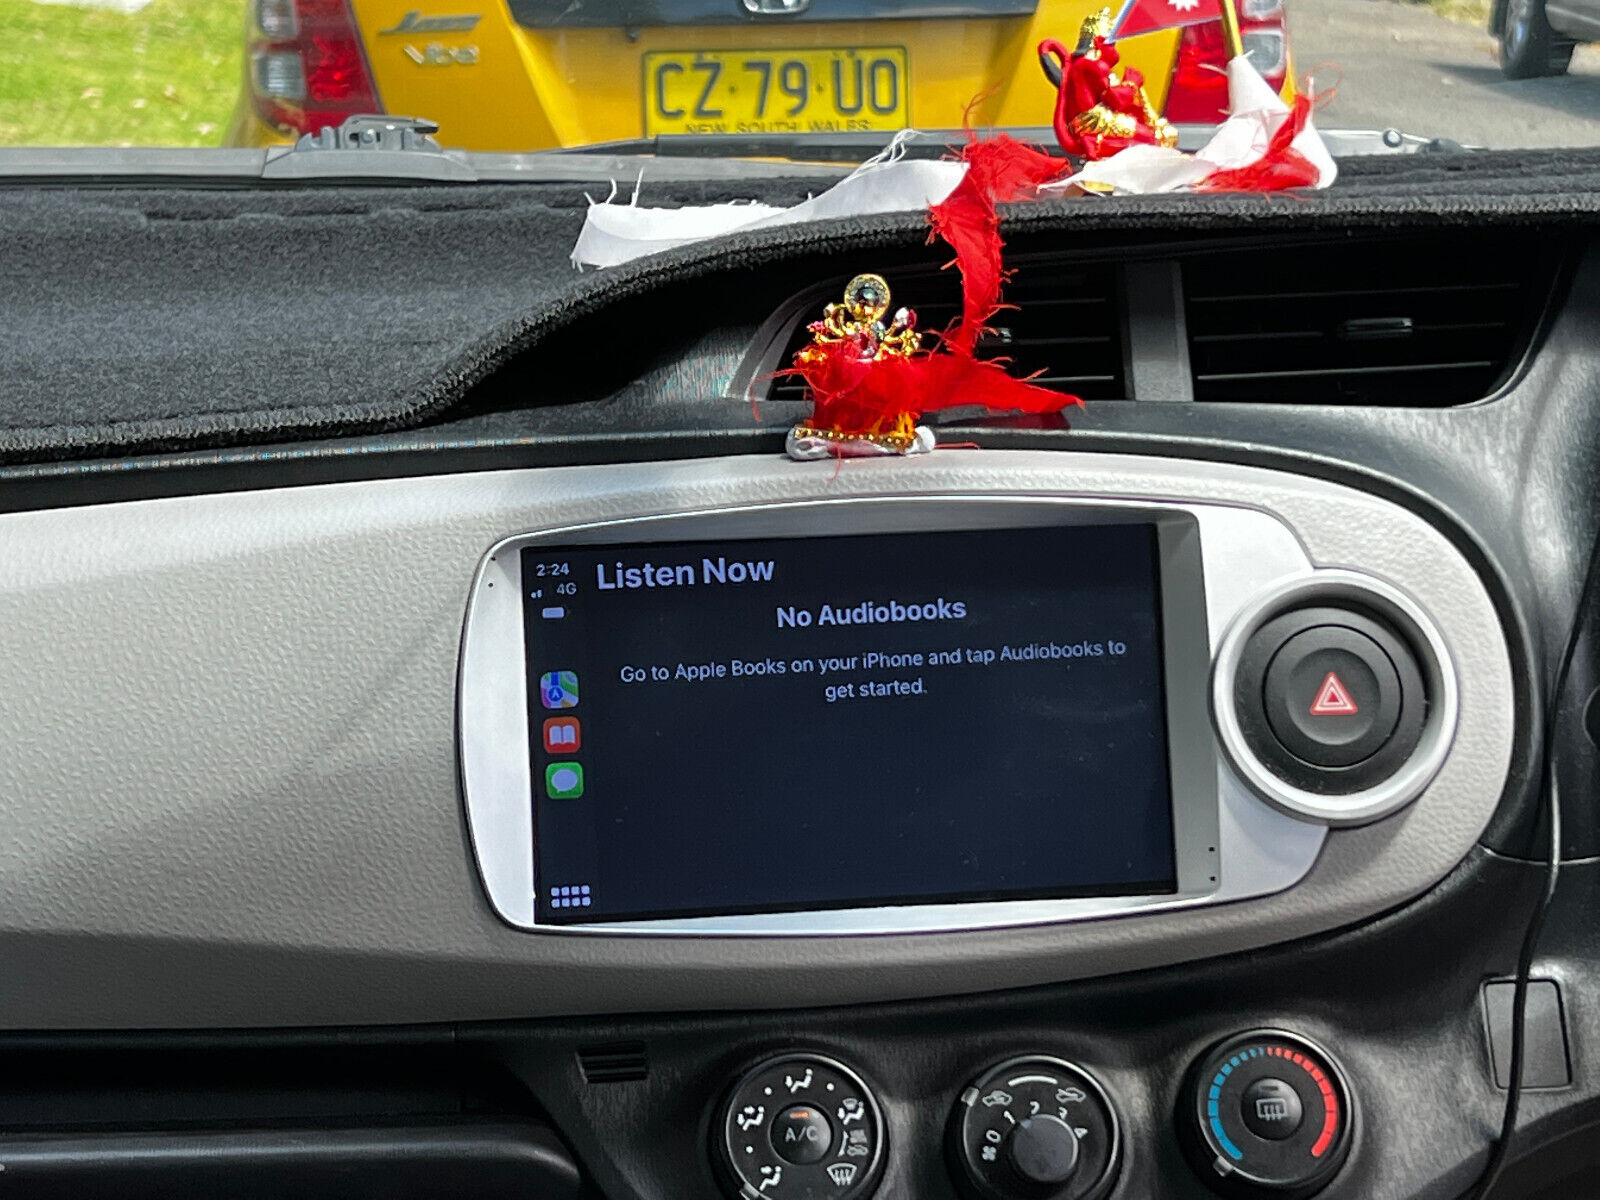 How to Use Android Auto and Apple CarPlay in Your Toyota